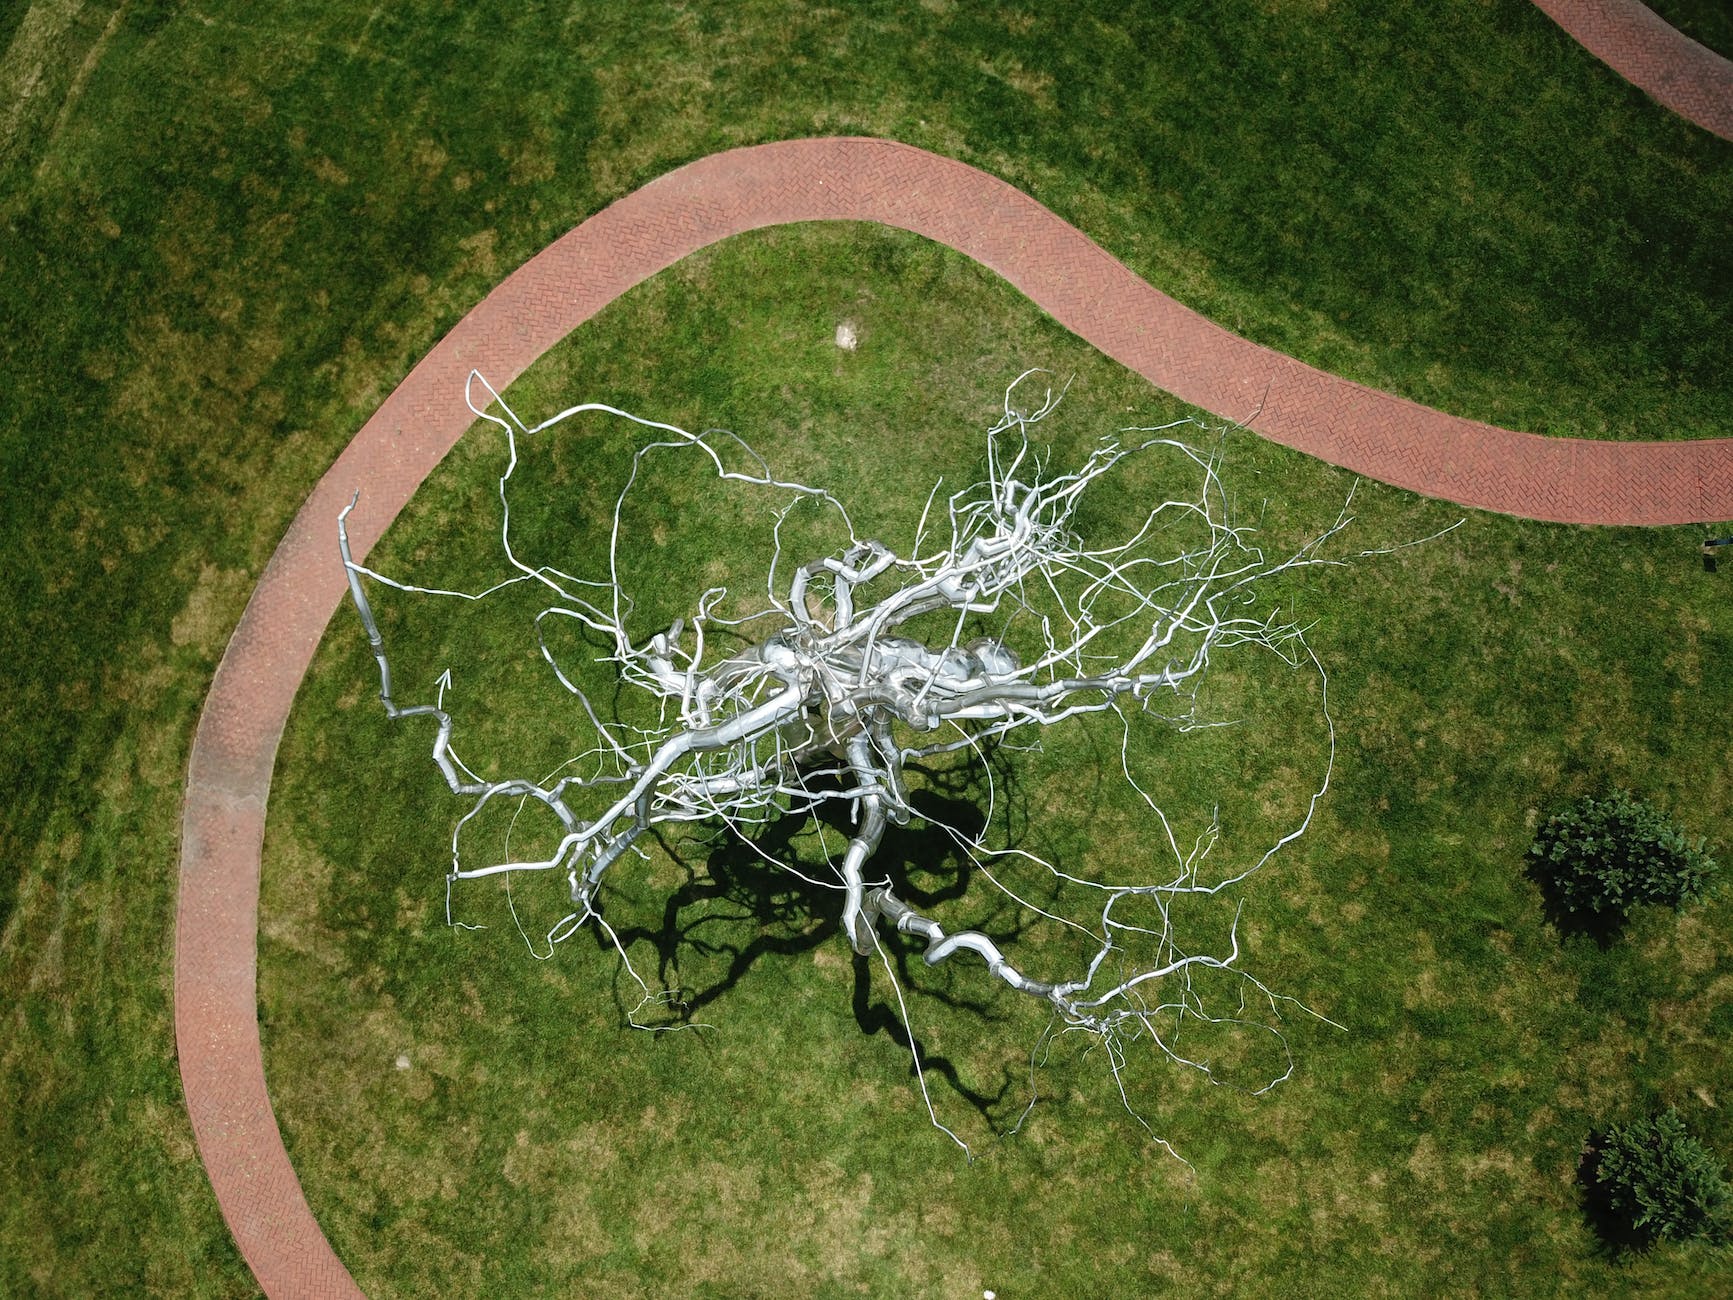 top view of a neuron sculpture in the lawn